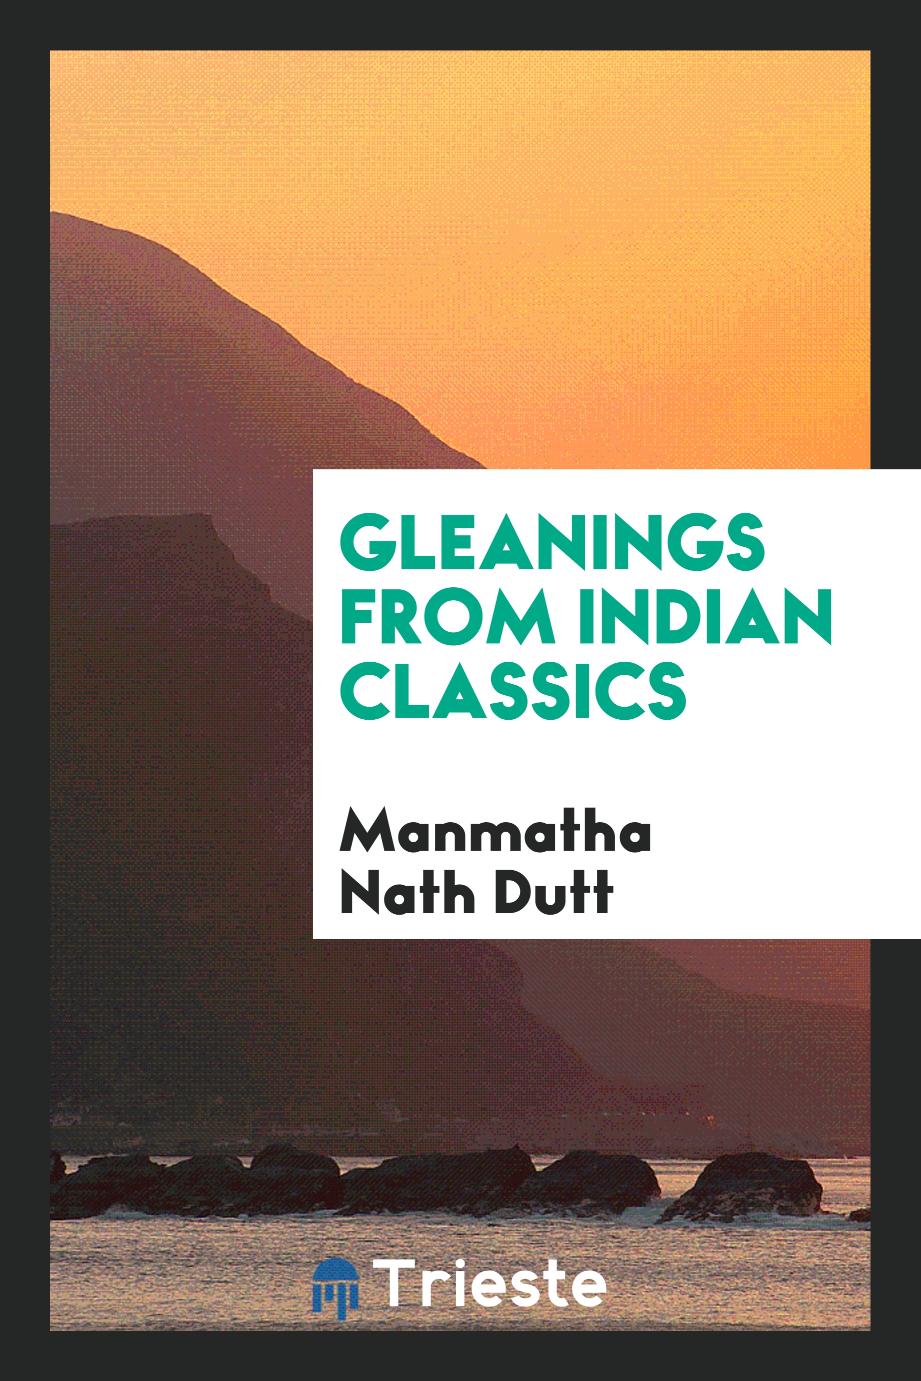 Gleanings from Indian classics